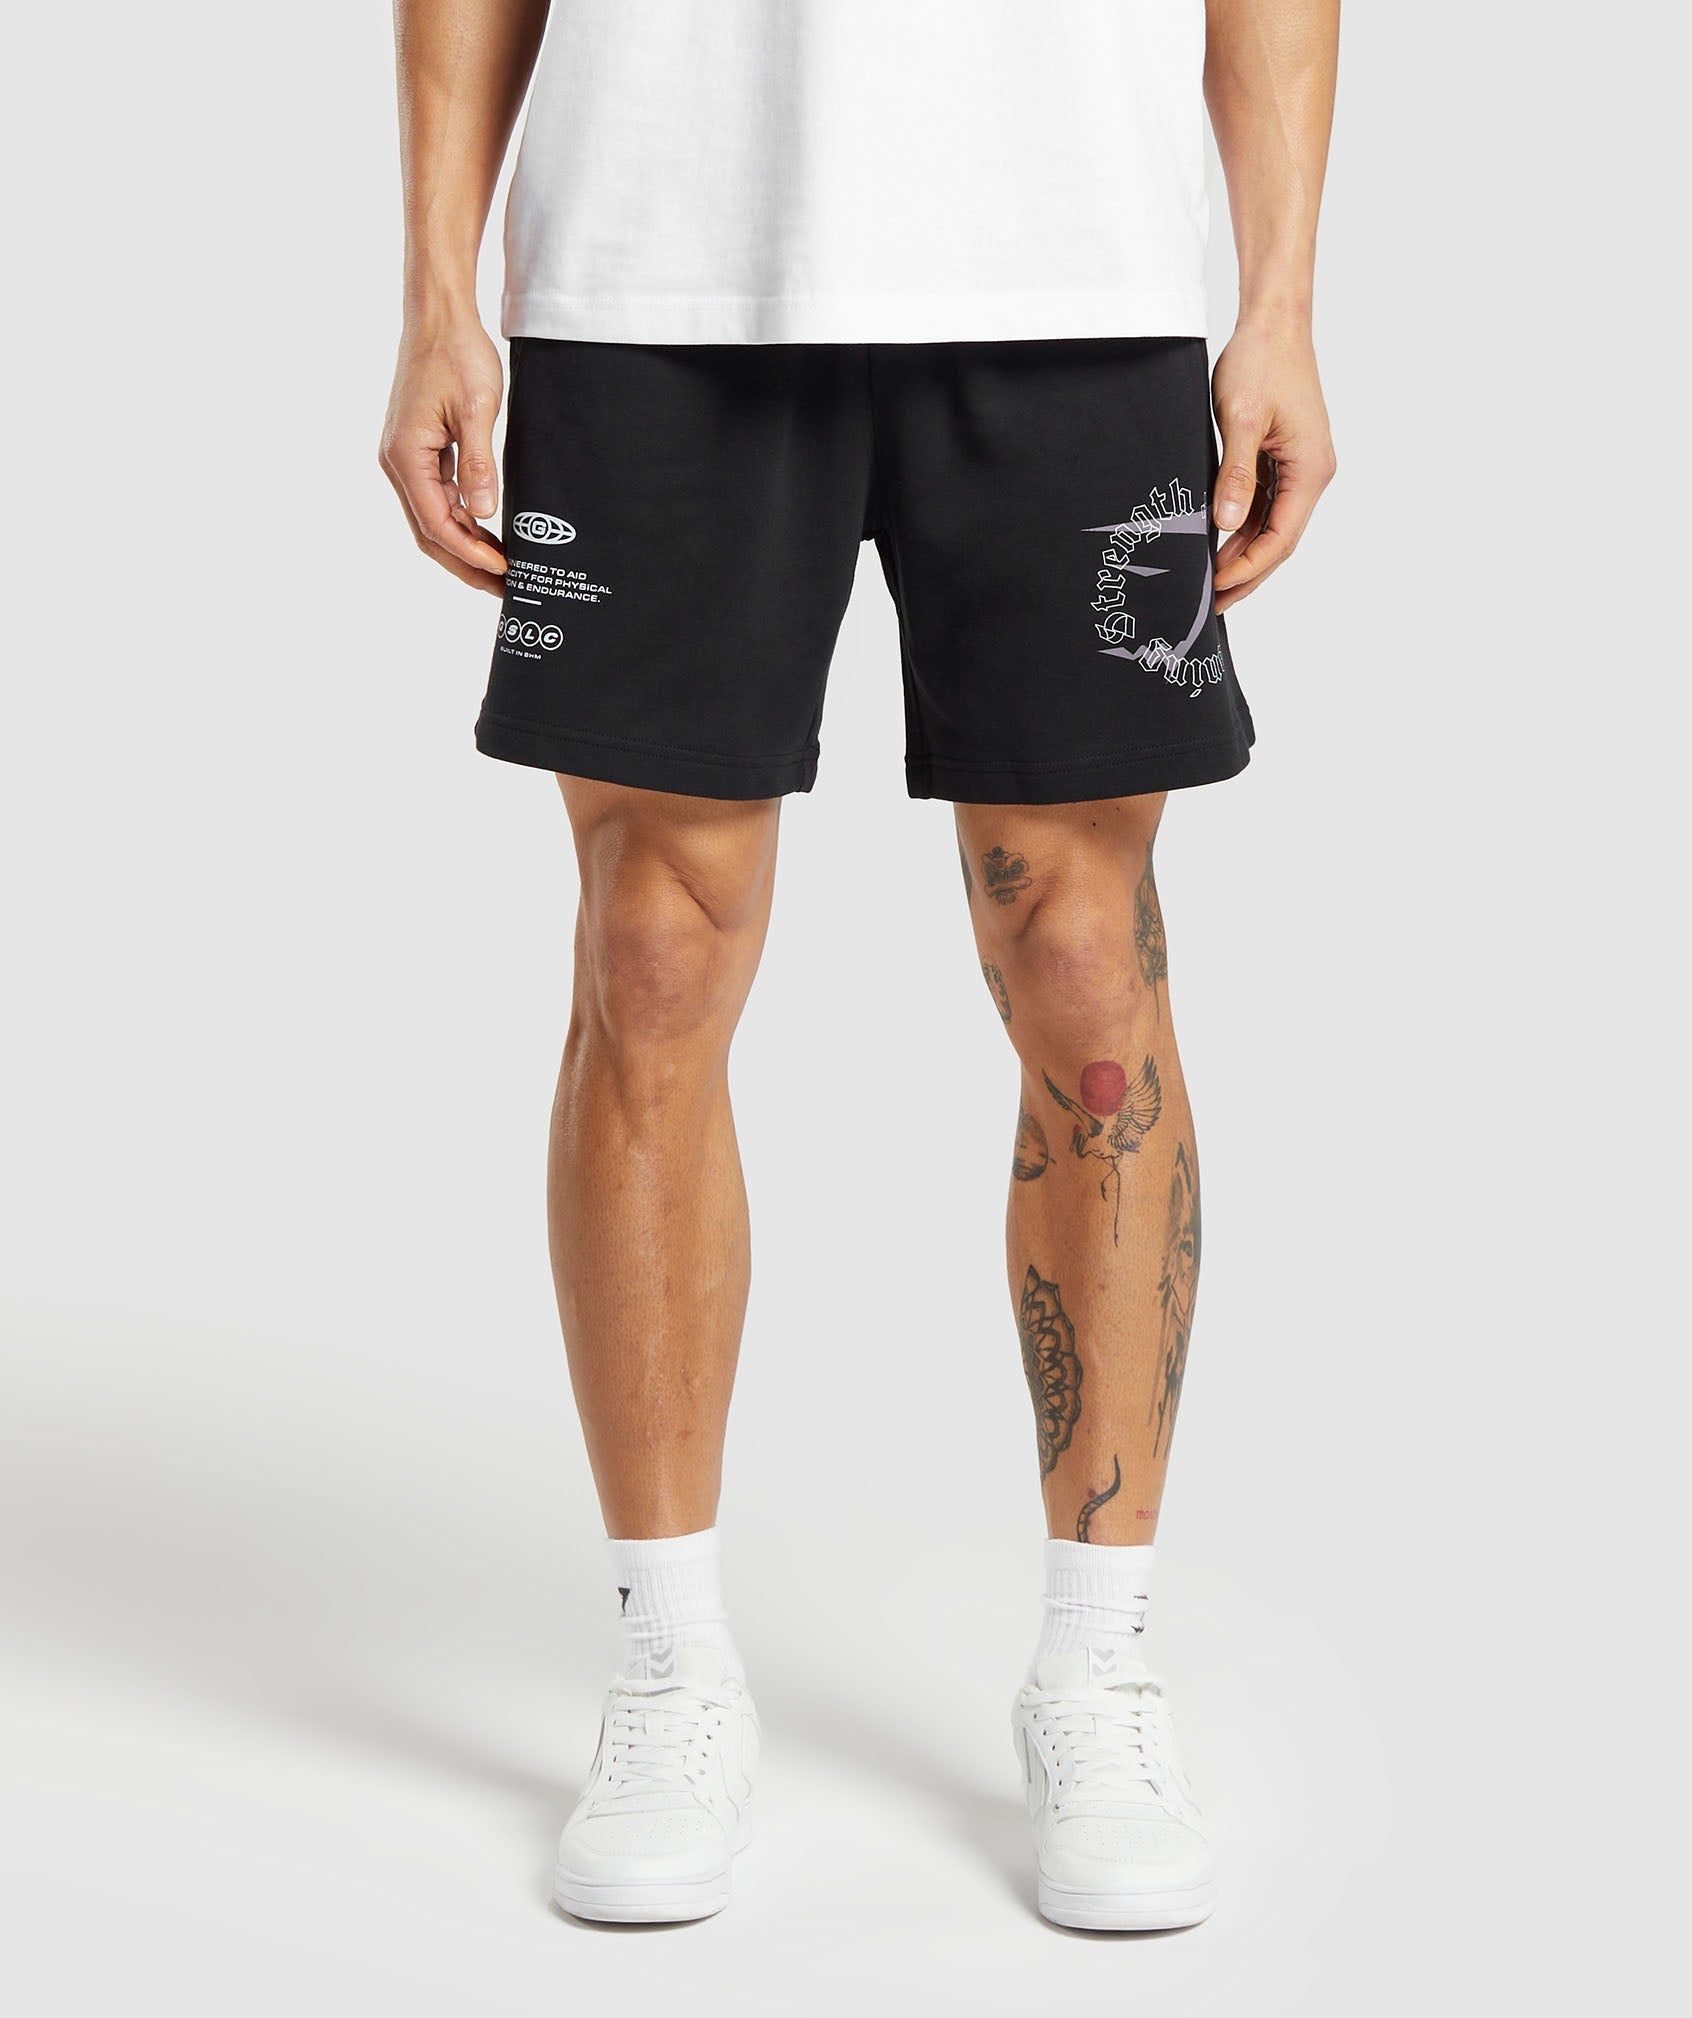 Strength and Conditioning 7" Shorts in Black